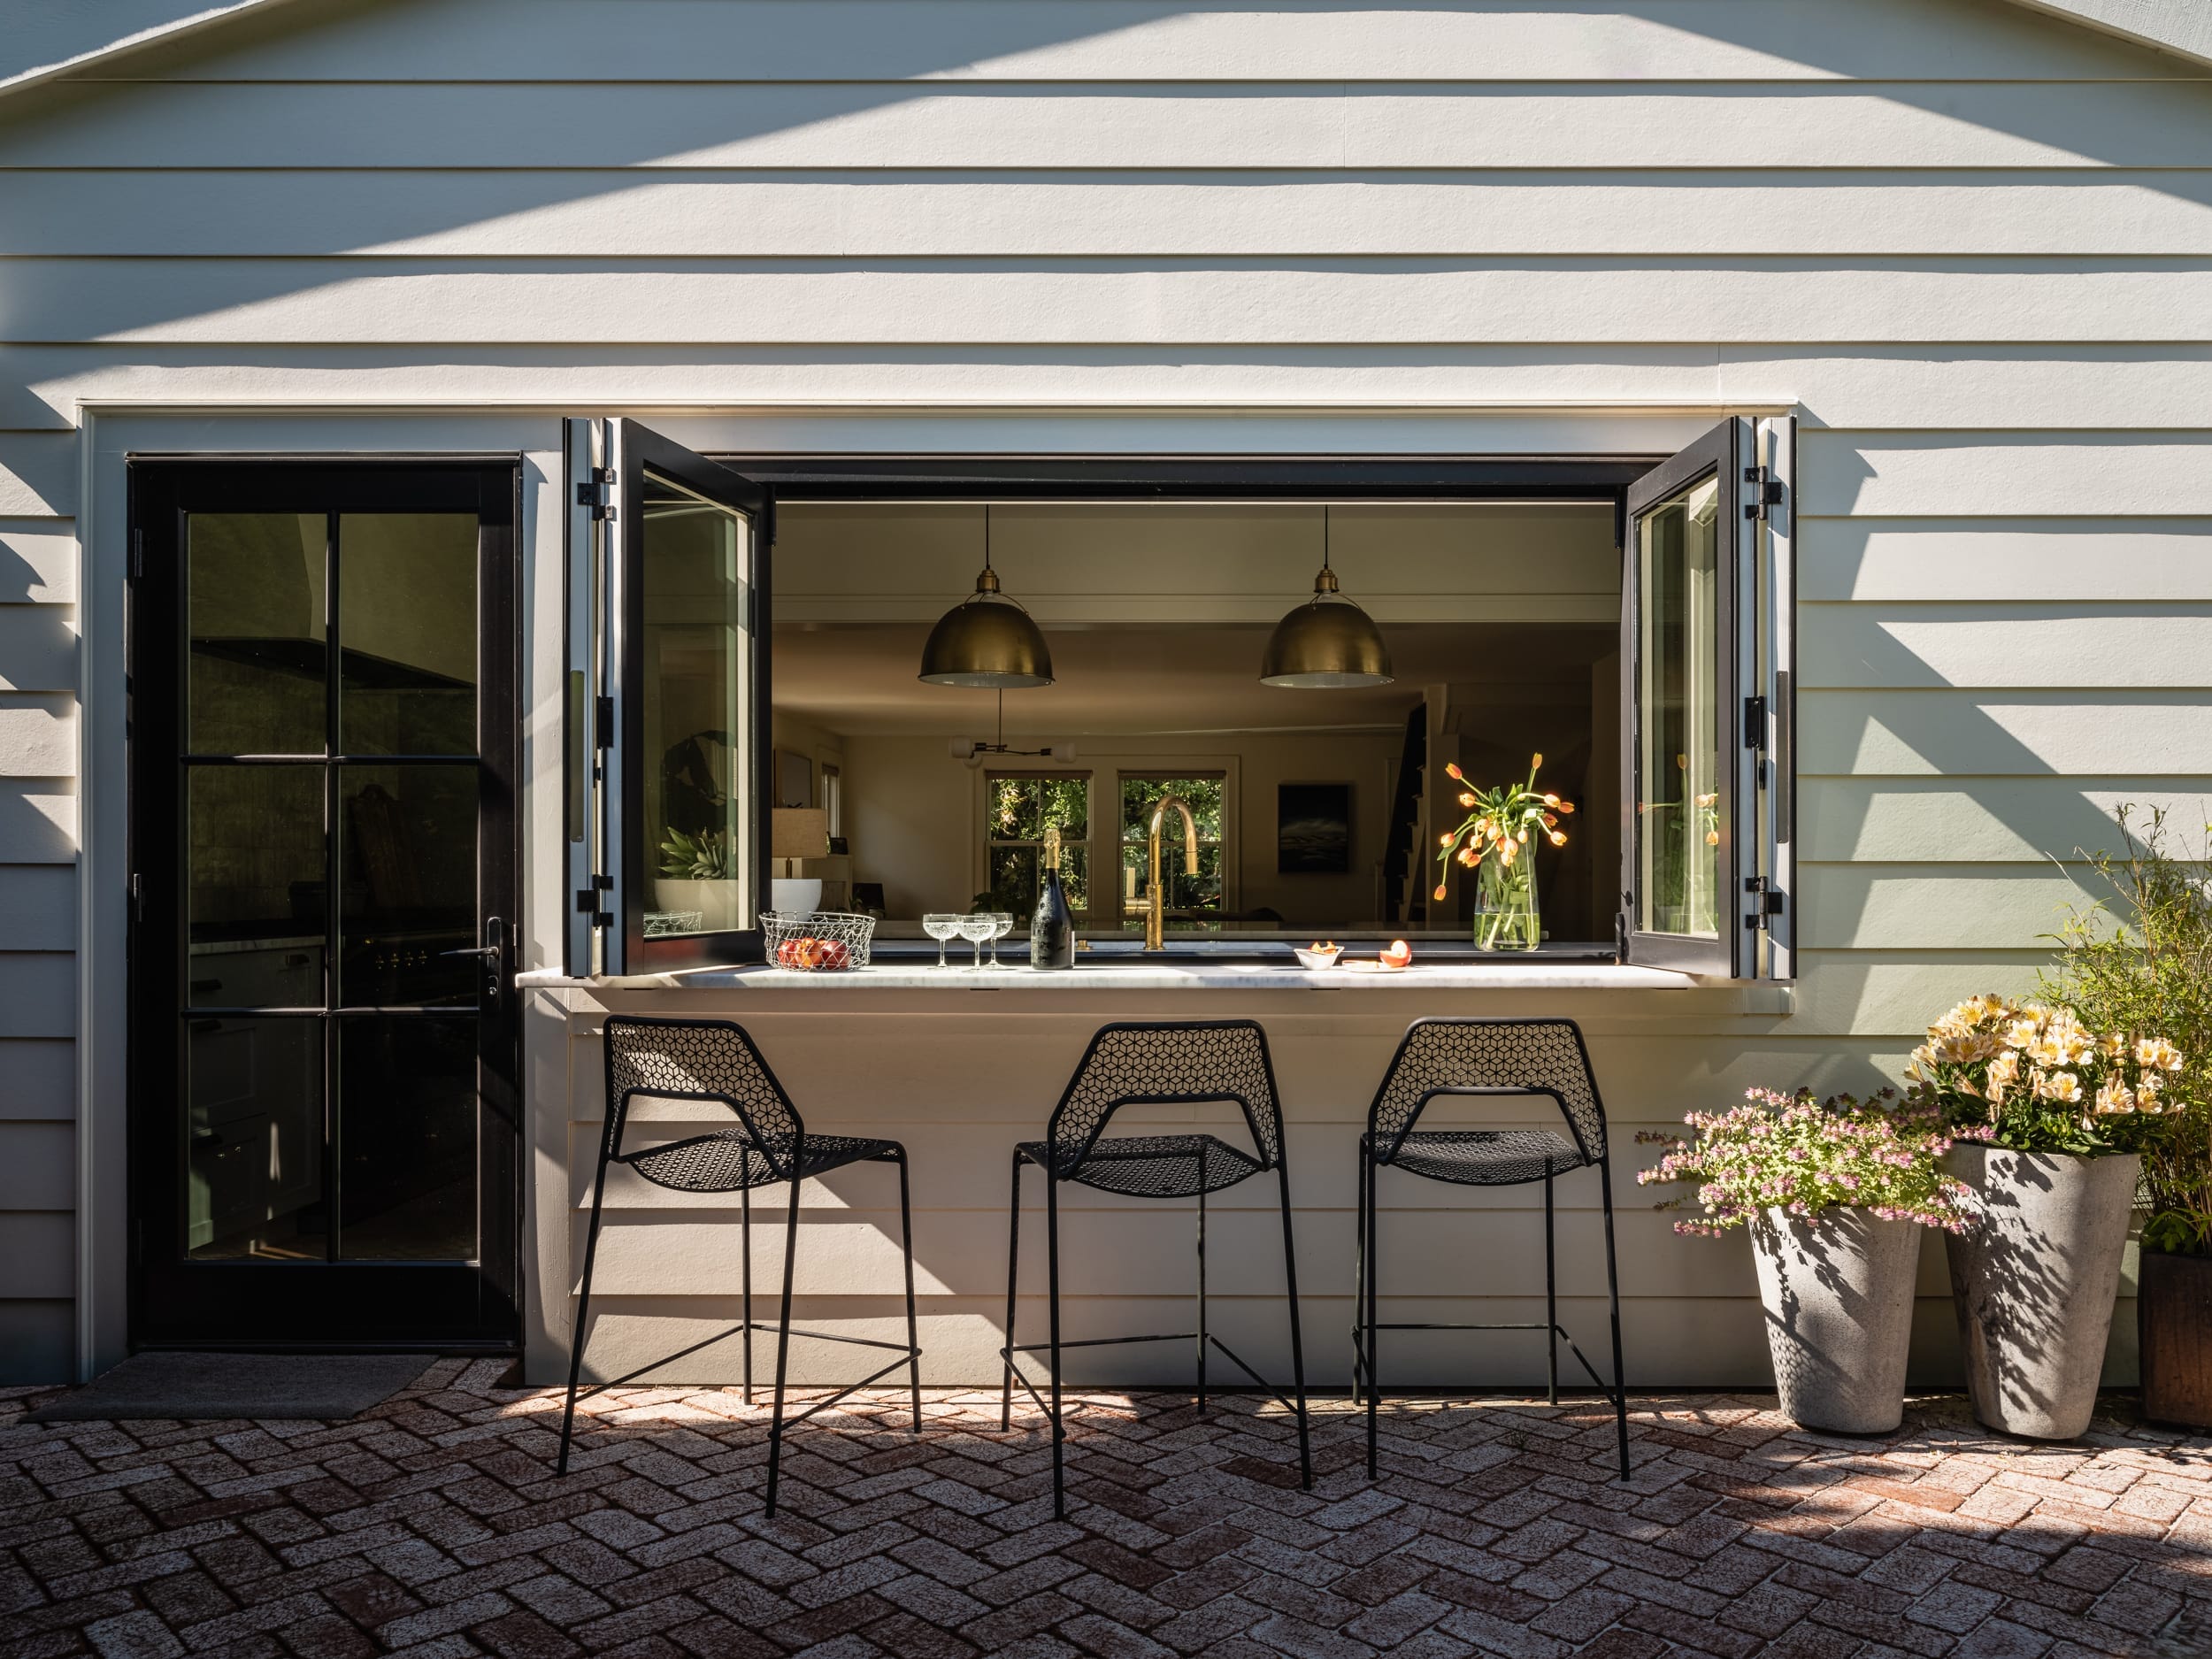 An outdoor kitchen with stools and a window.